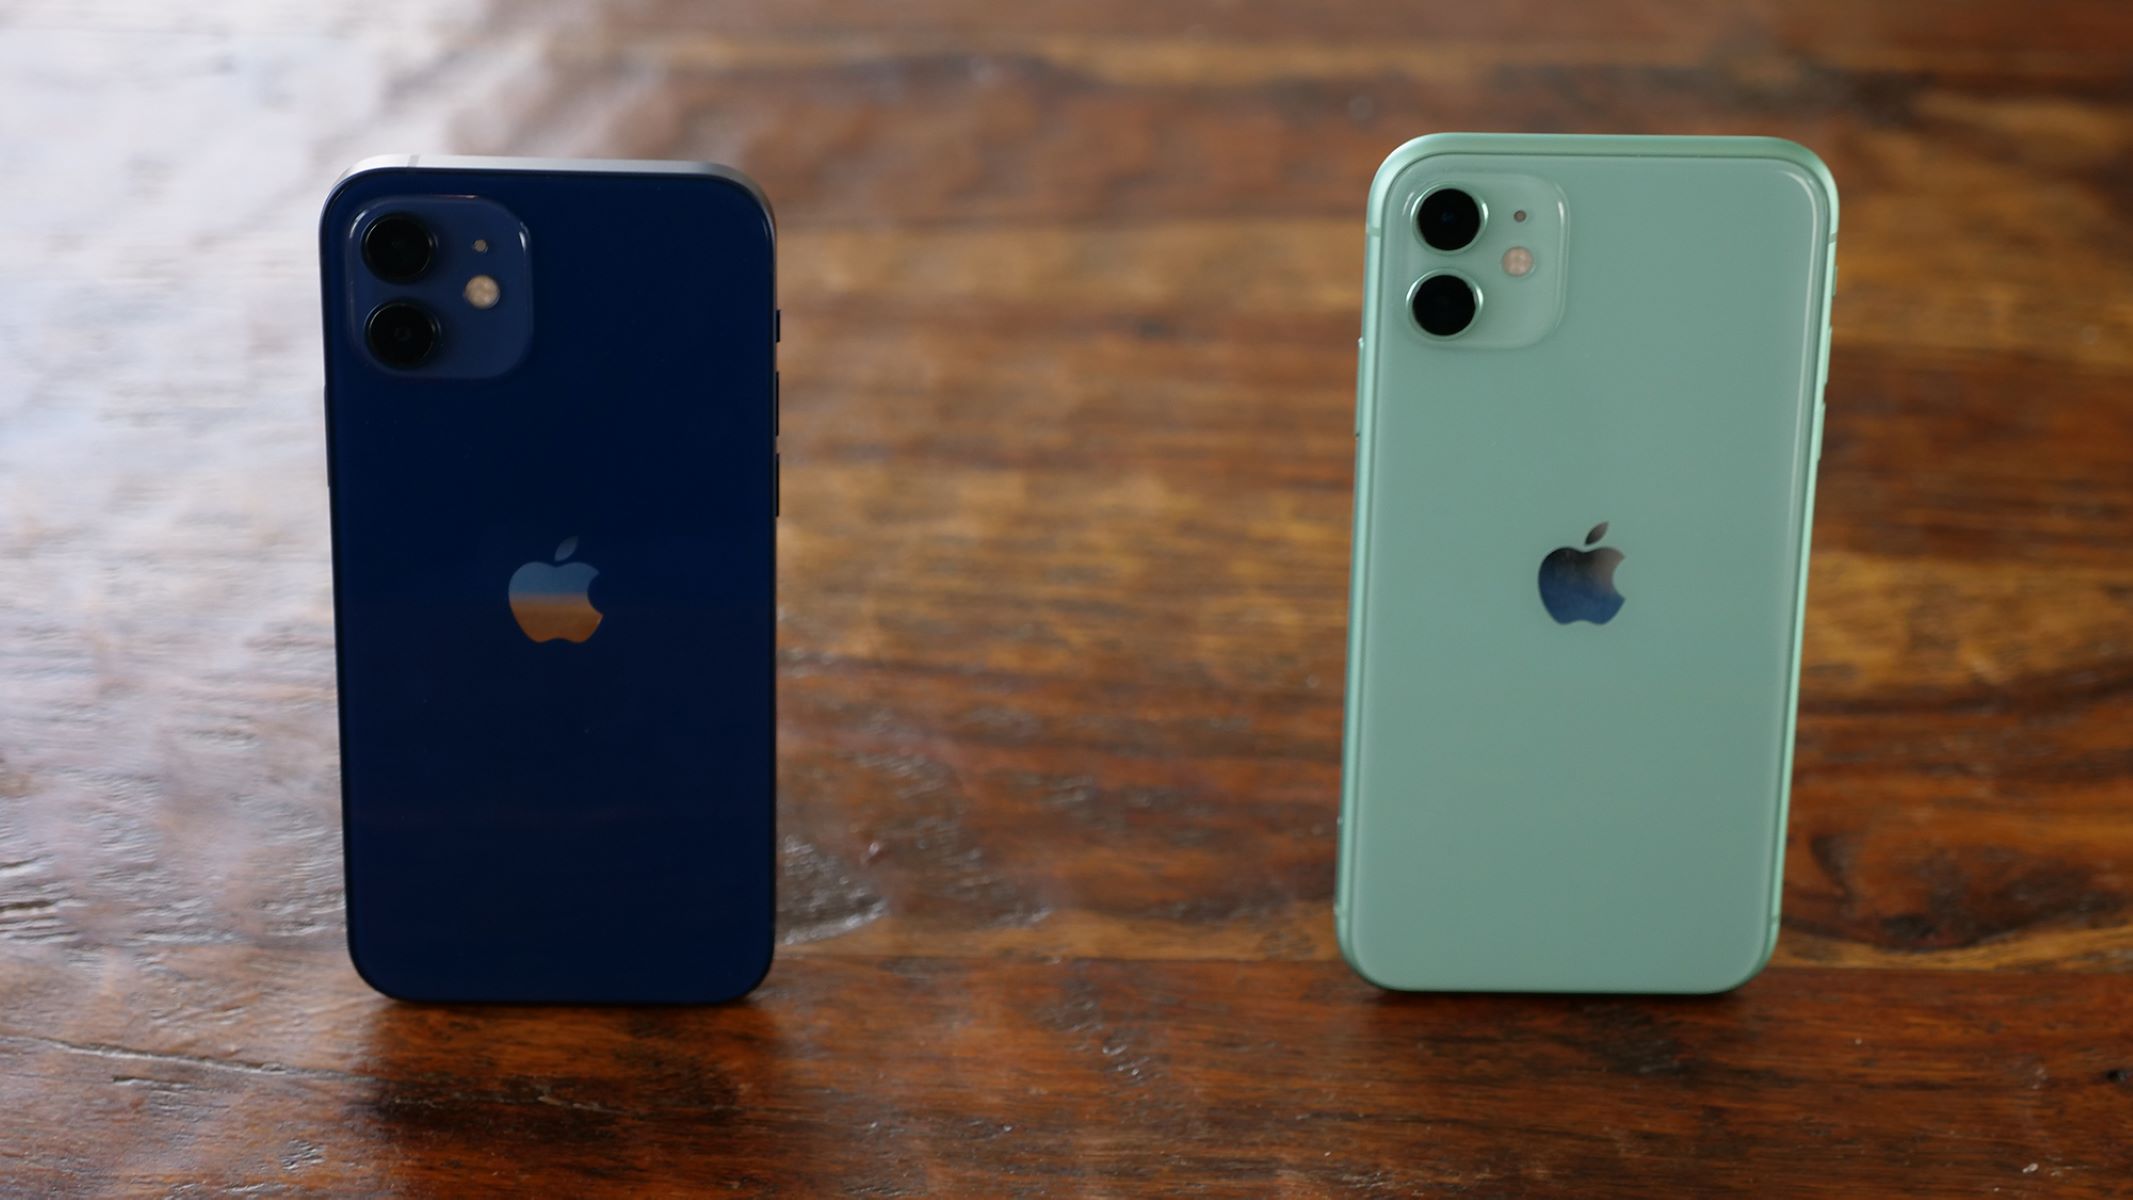 model-contrast-highlighting-the-differences-between-iphone-11-and-iphone-12